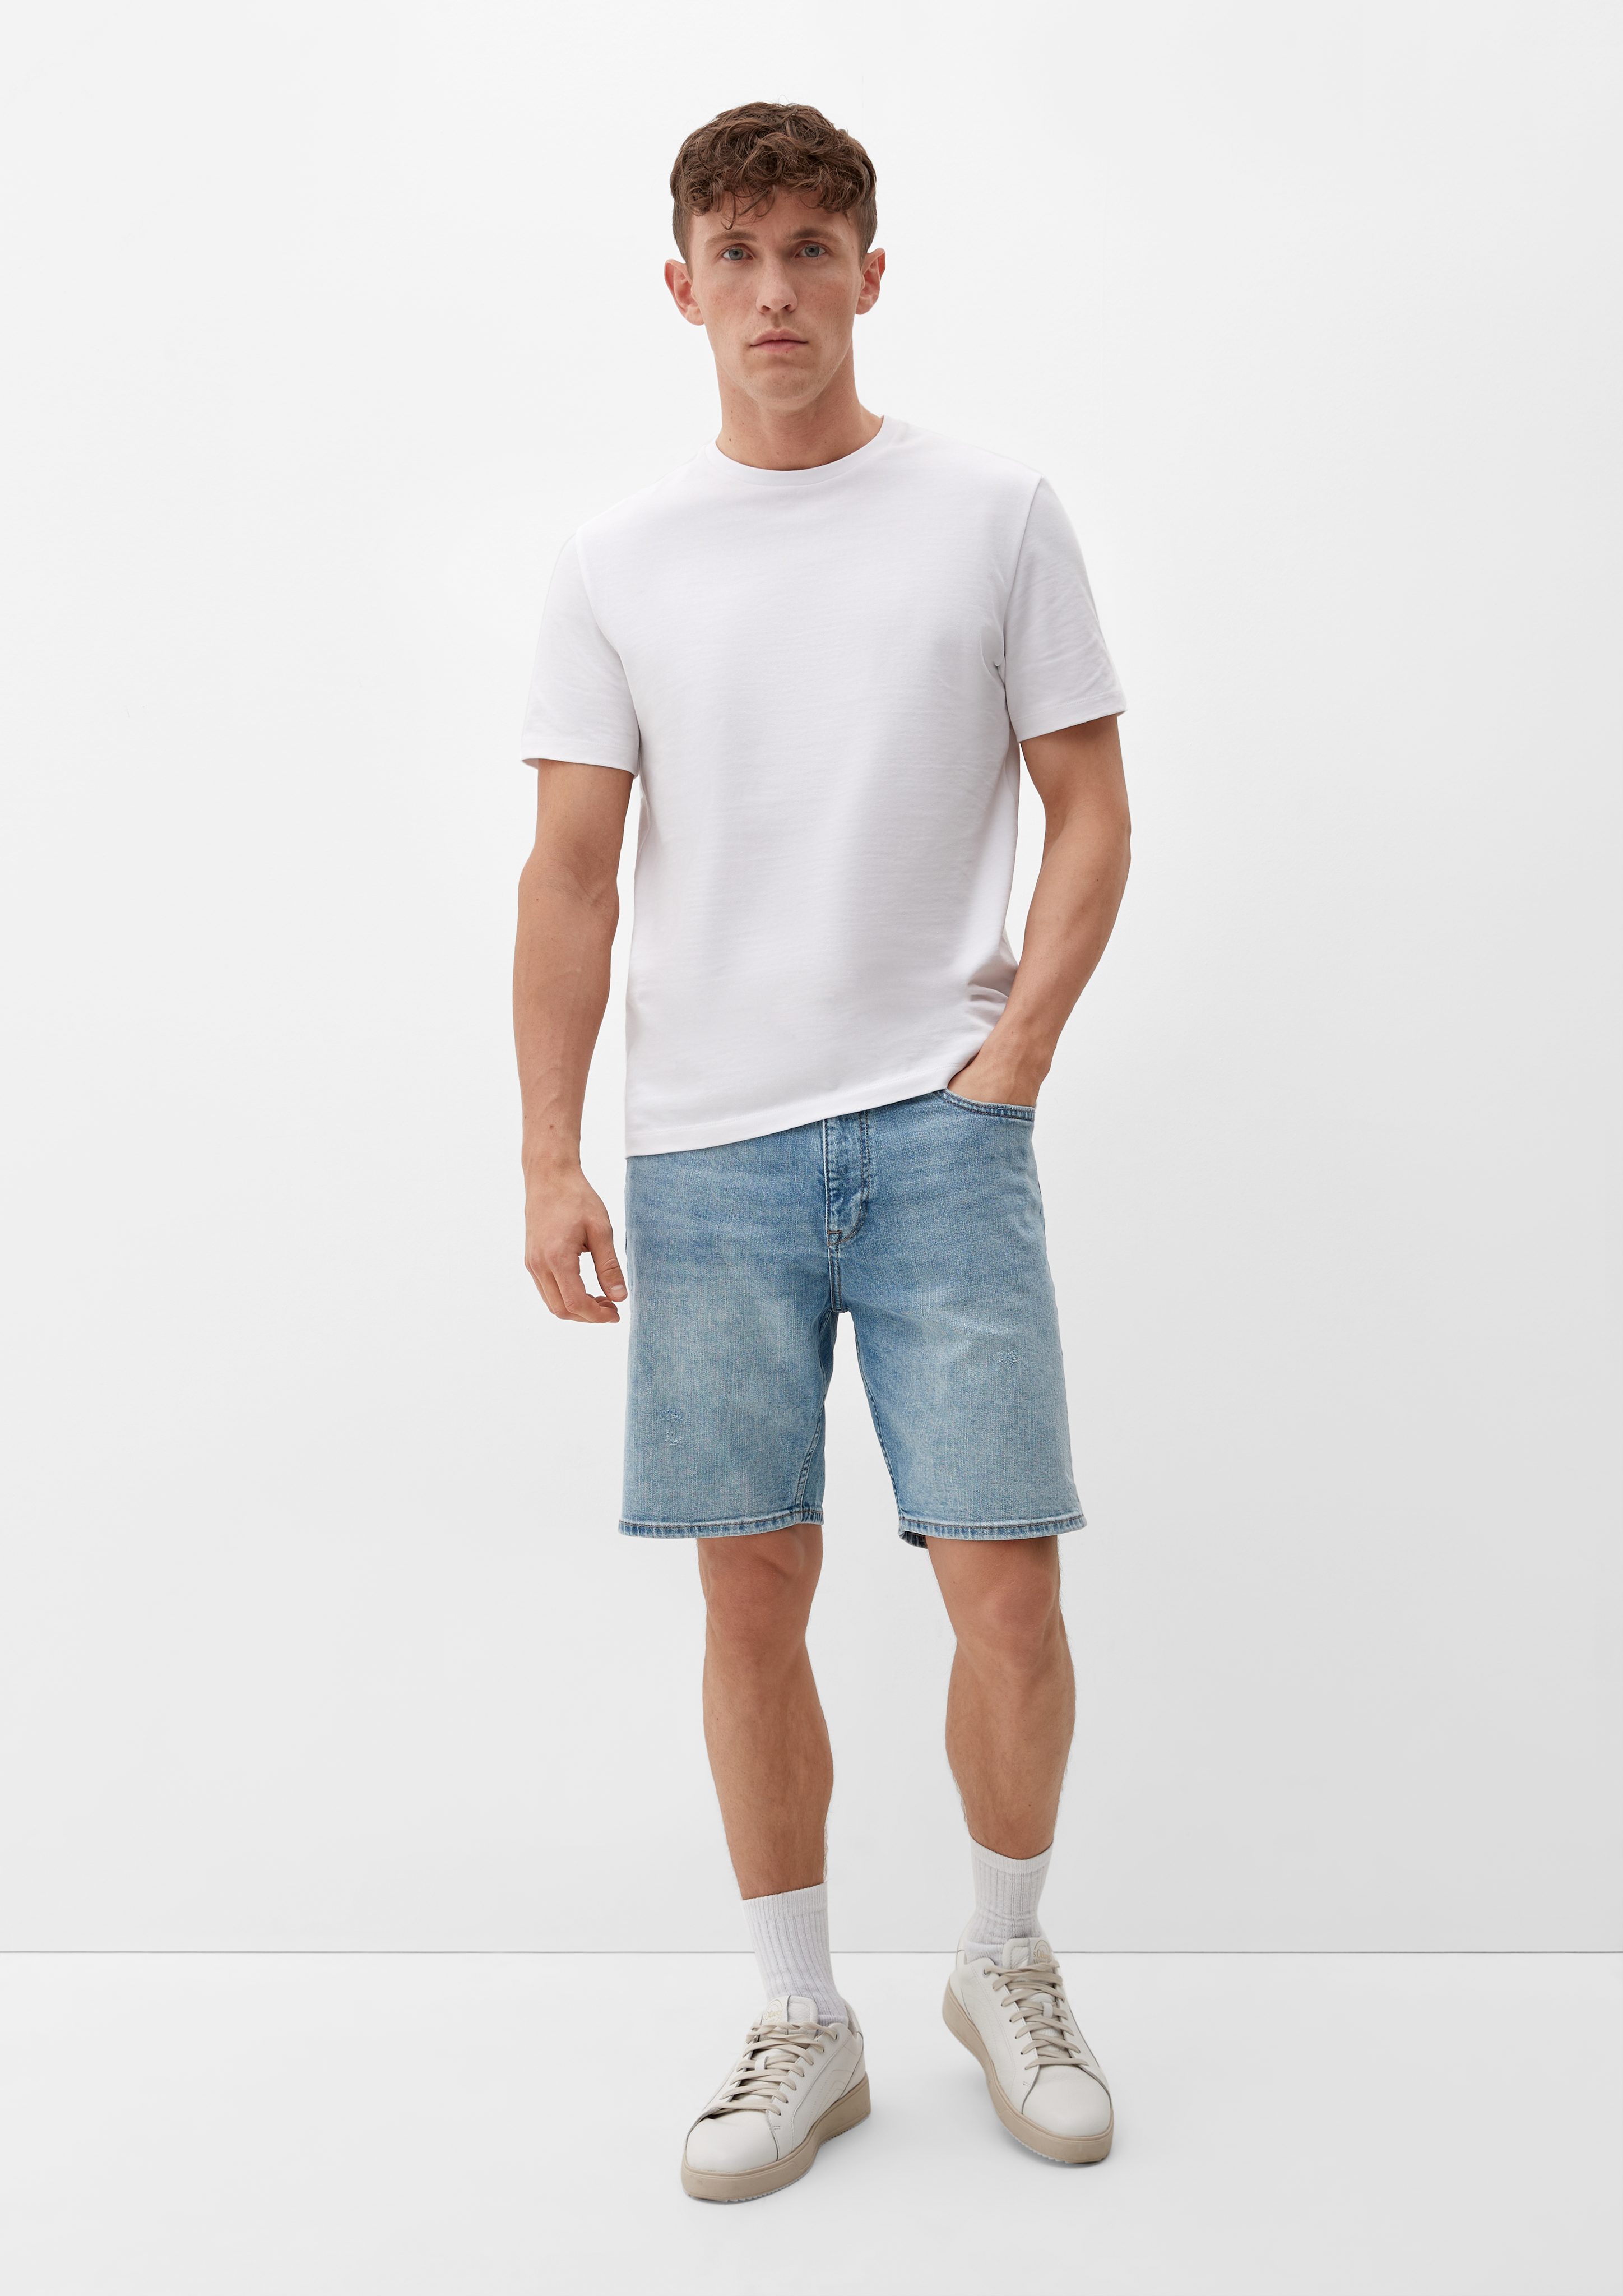 Jeansshorts Wide / Fit Rise / / Leg Mid s.Oliver Jeans-Shorts Relaxed Waschung